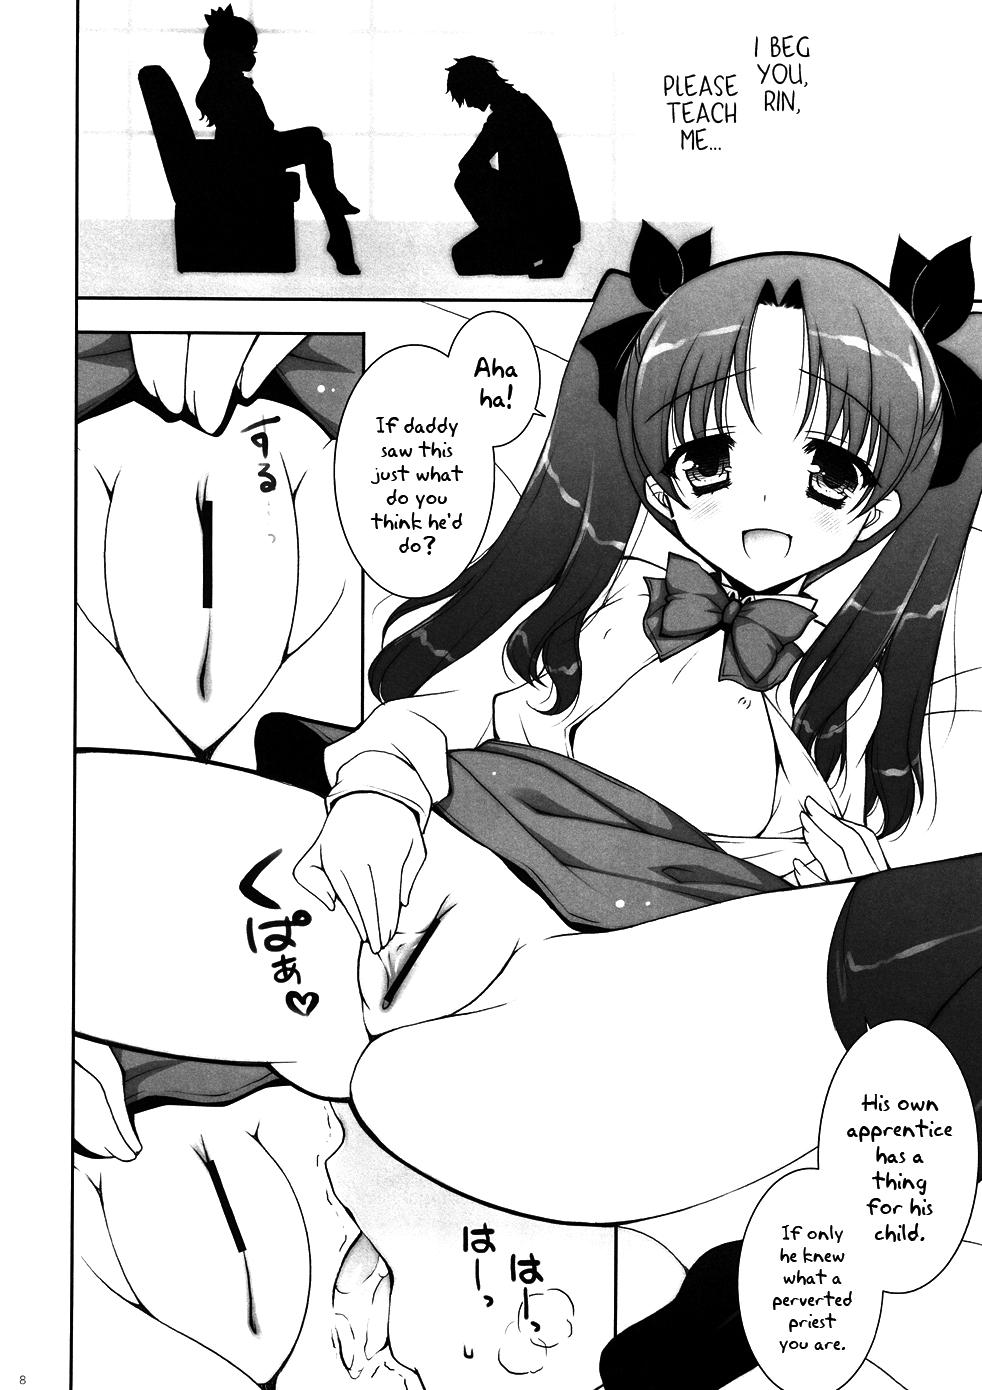 Foot Job The Aggressive Lolis I Come up with Are the Greatest!! - Fate zero Putinha - Page 7